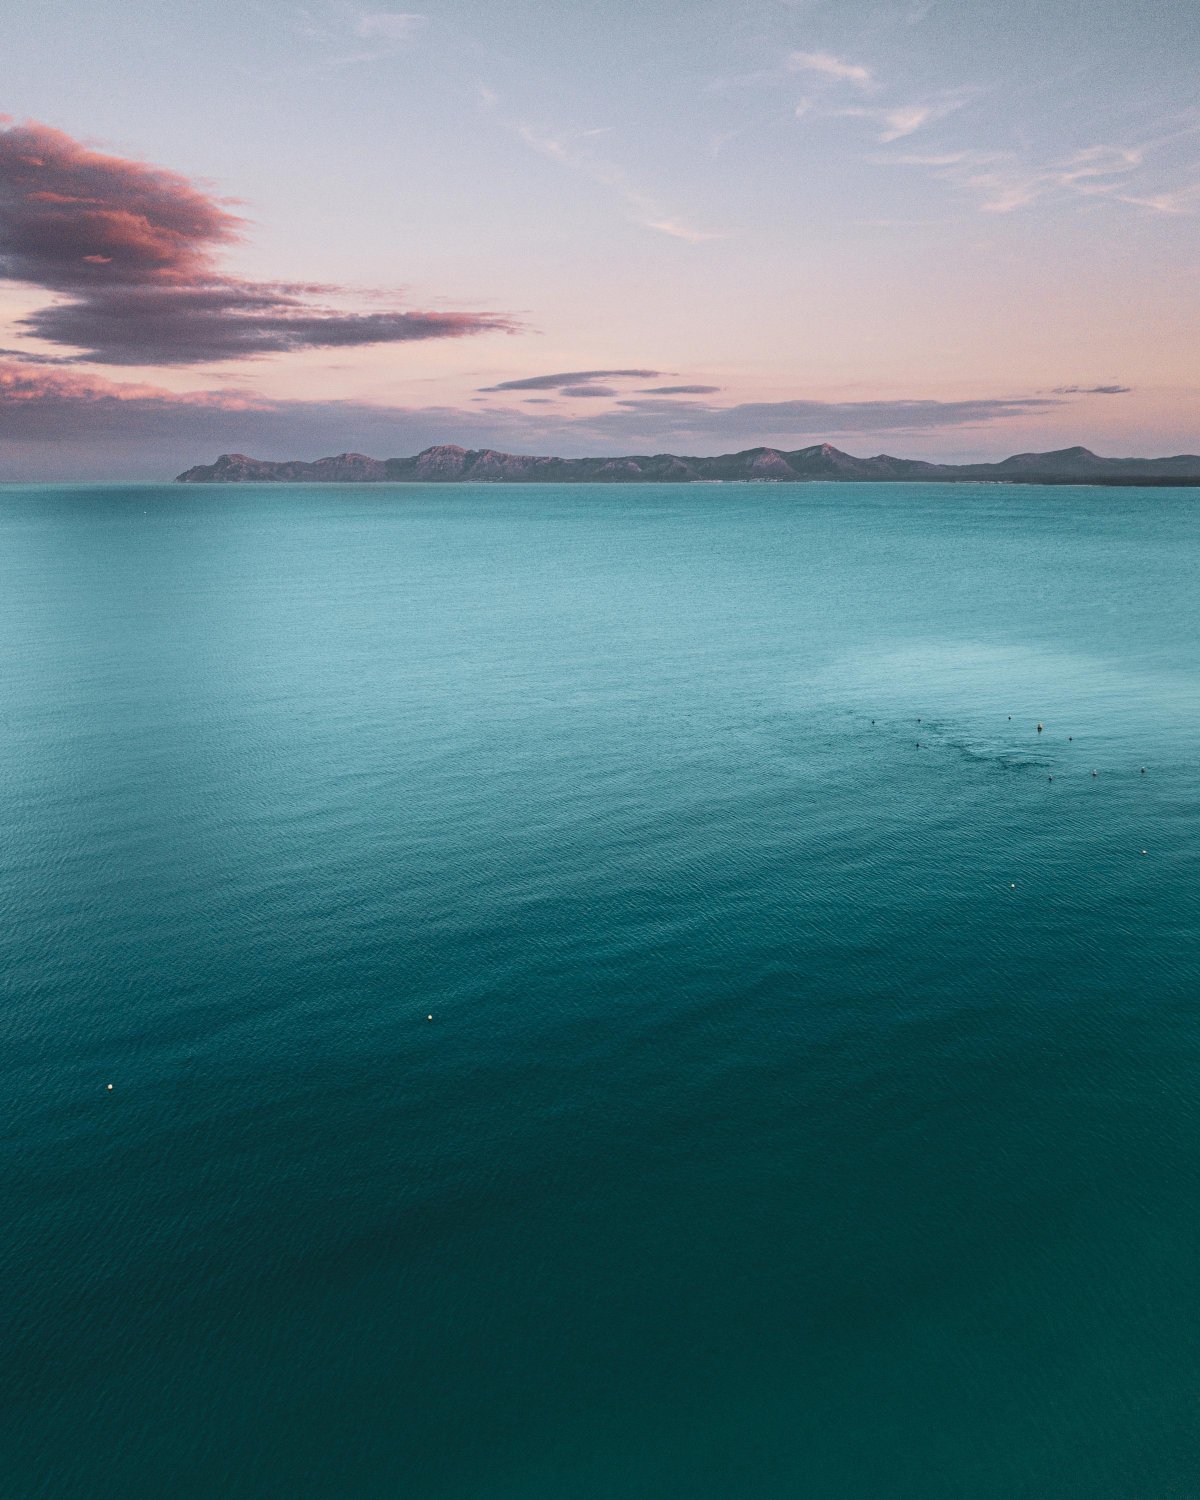 Aesthetic pictures of the broad and calm sea